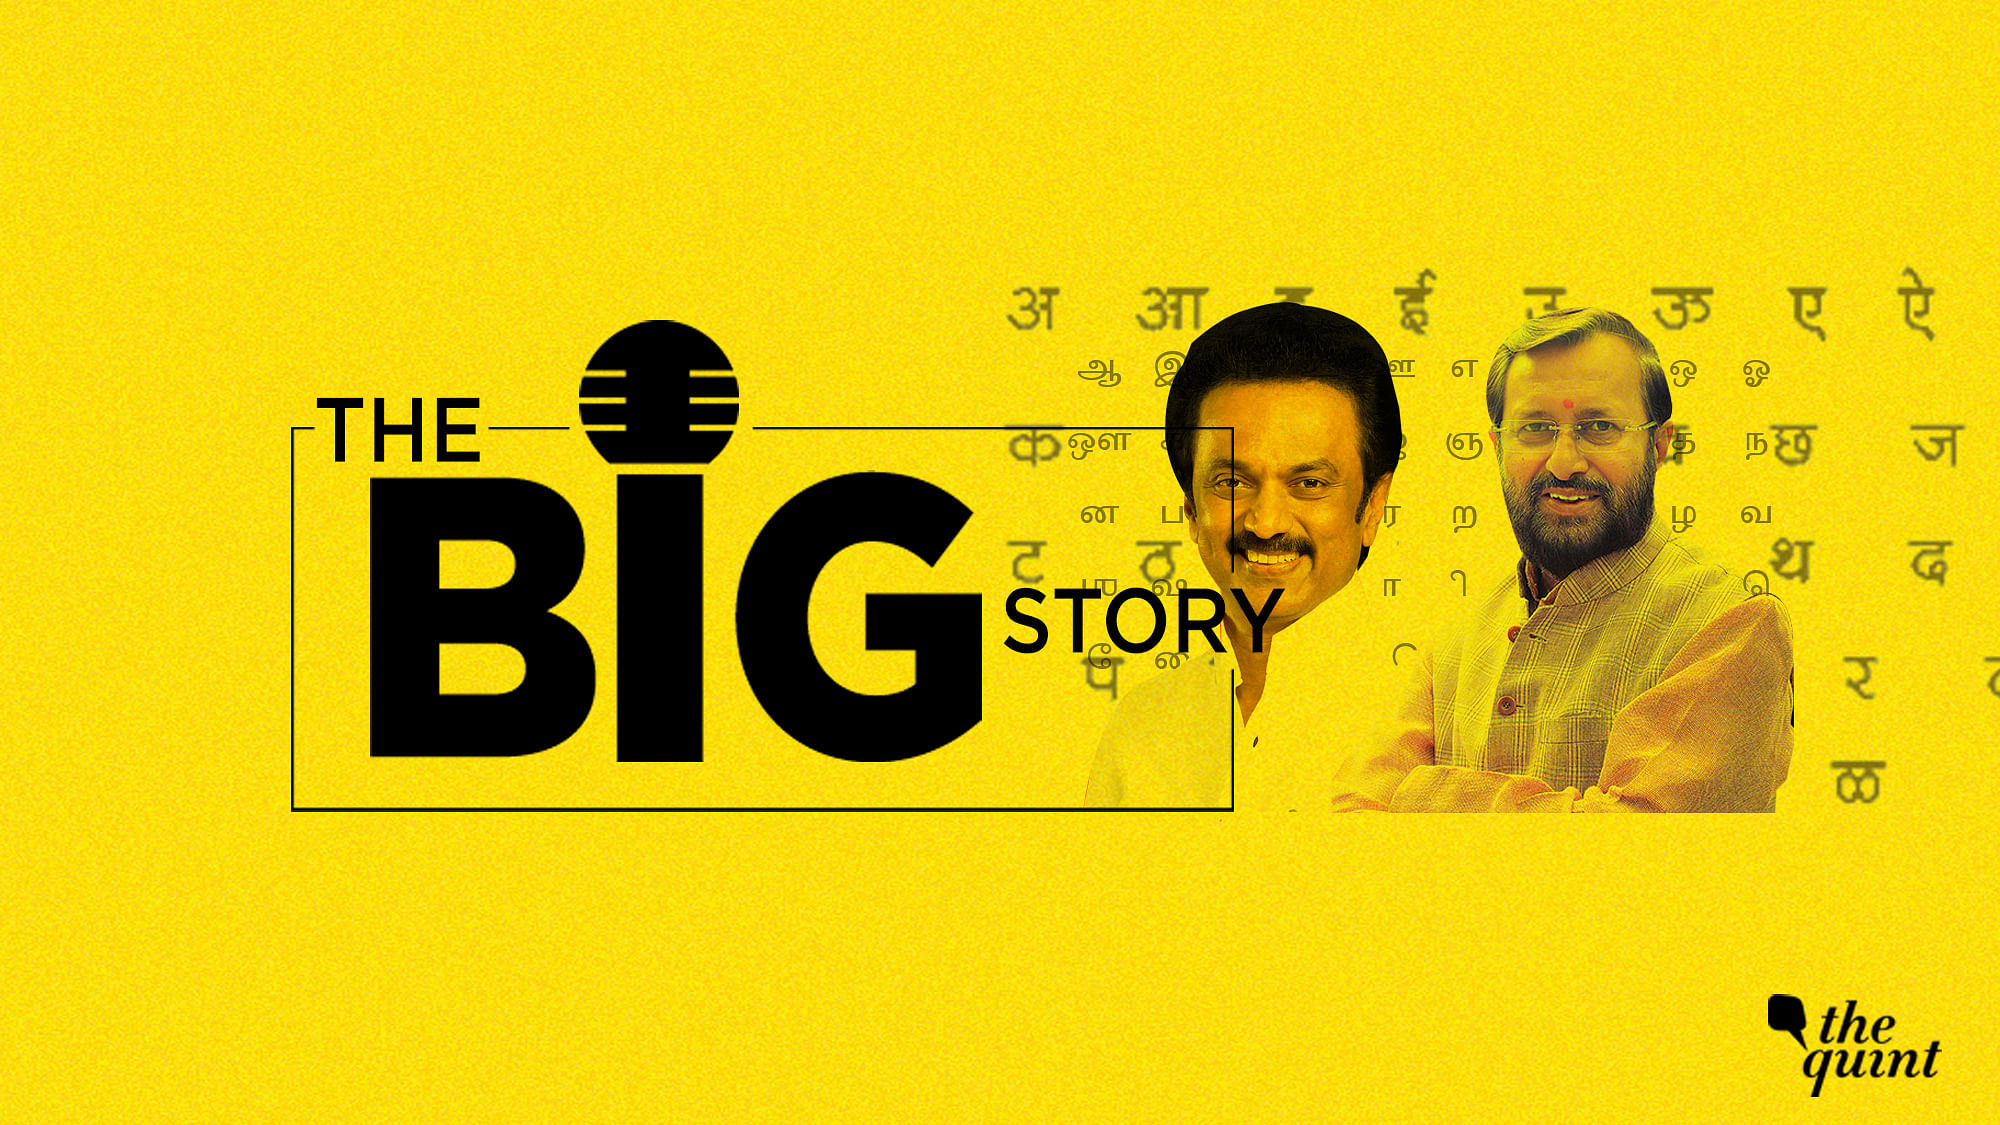 In this episode of The Big Story, we talk about the three-language plan that the MHRD came up with in its new draft of the National Education Policy, which, if passed, would make Hindi compulsory for students in the southern states of India.